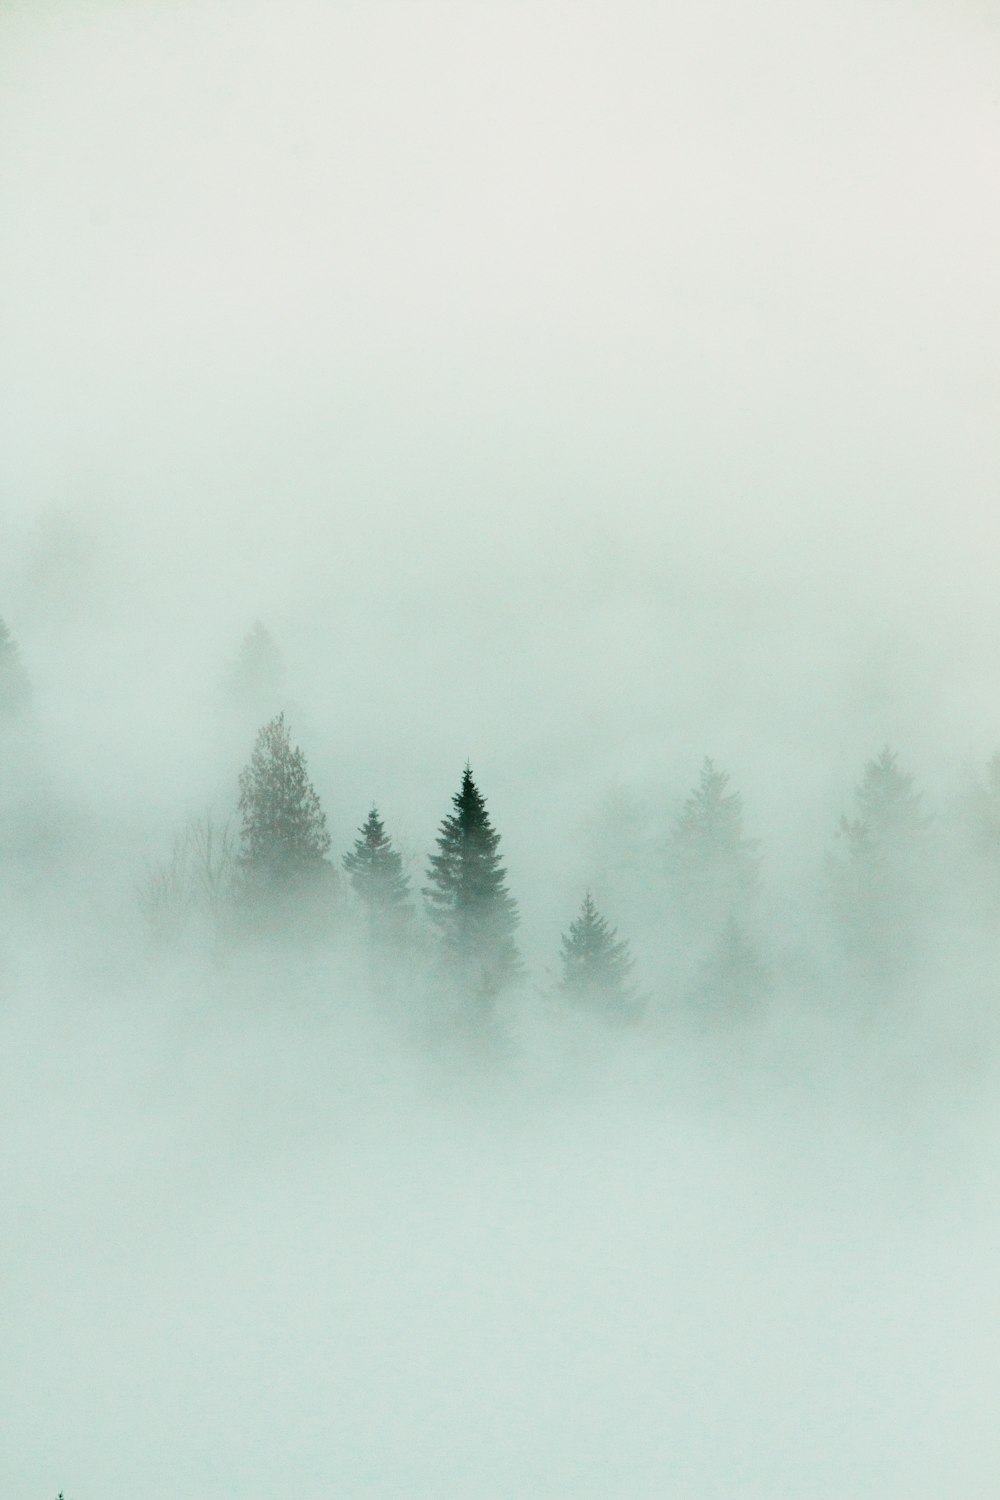 green pine trees covered with white fog